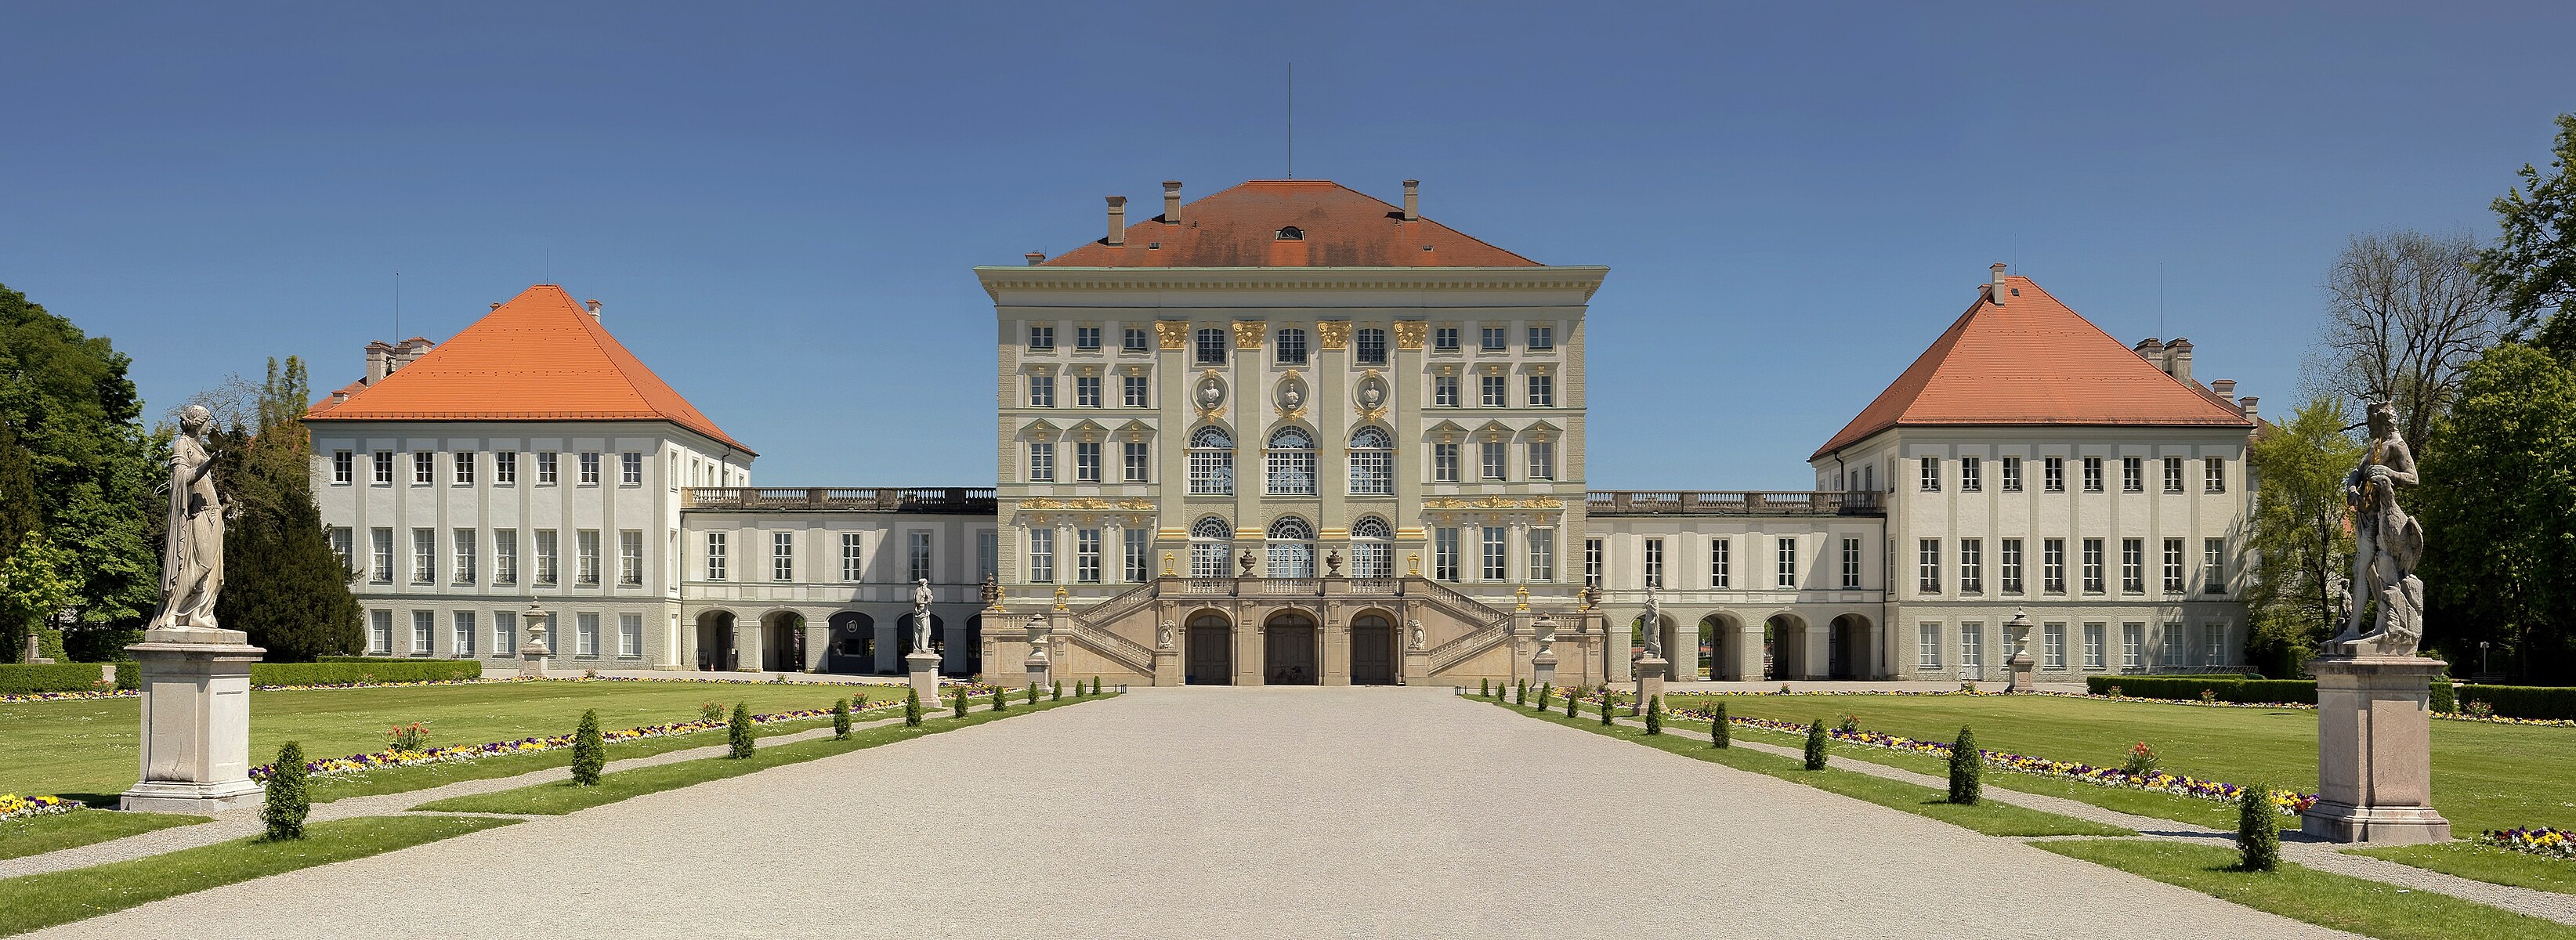 The Nymphenburg Palace (German: Schloss Nymphenburg) is a Baroque palace in Munich, Bavaria, Germany.